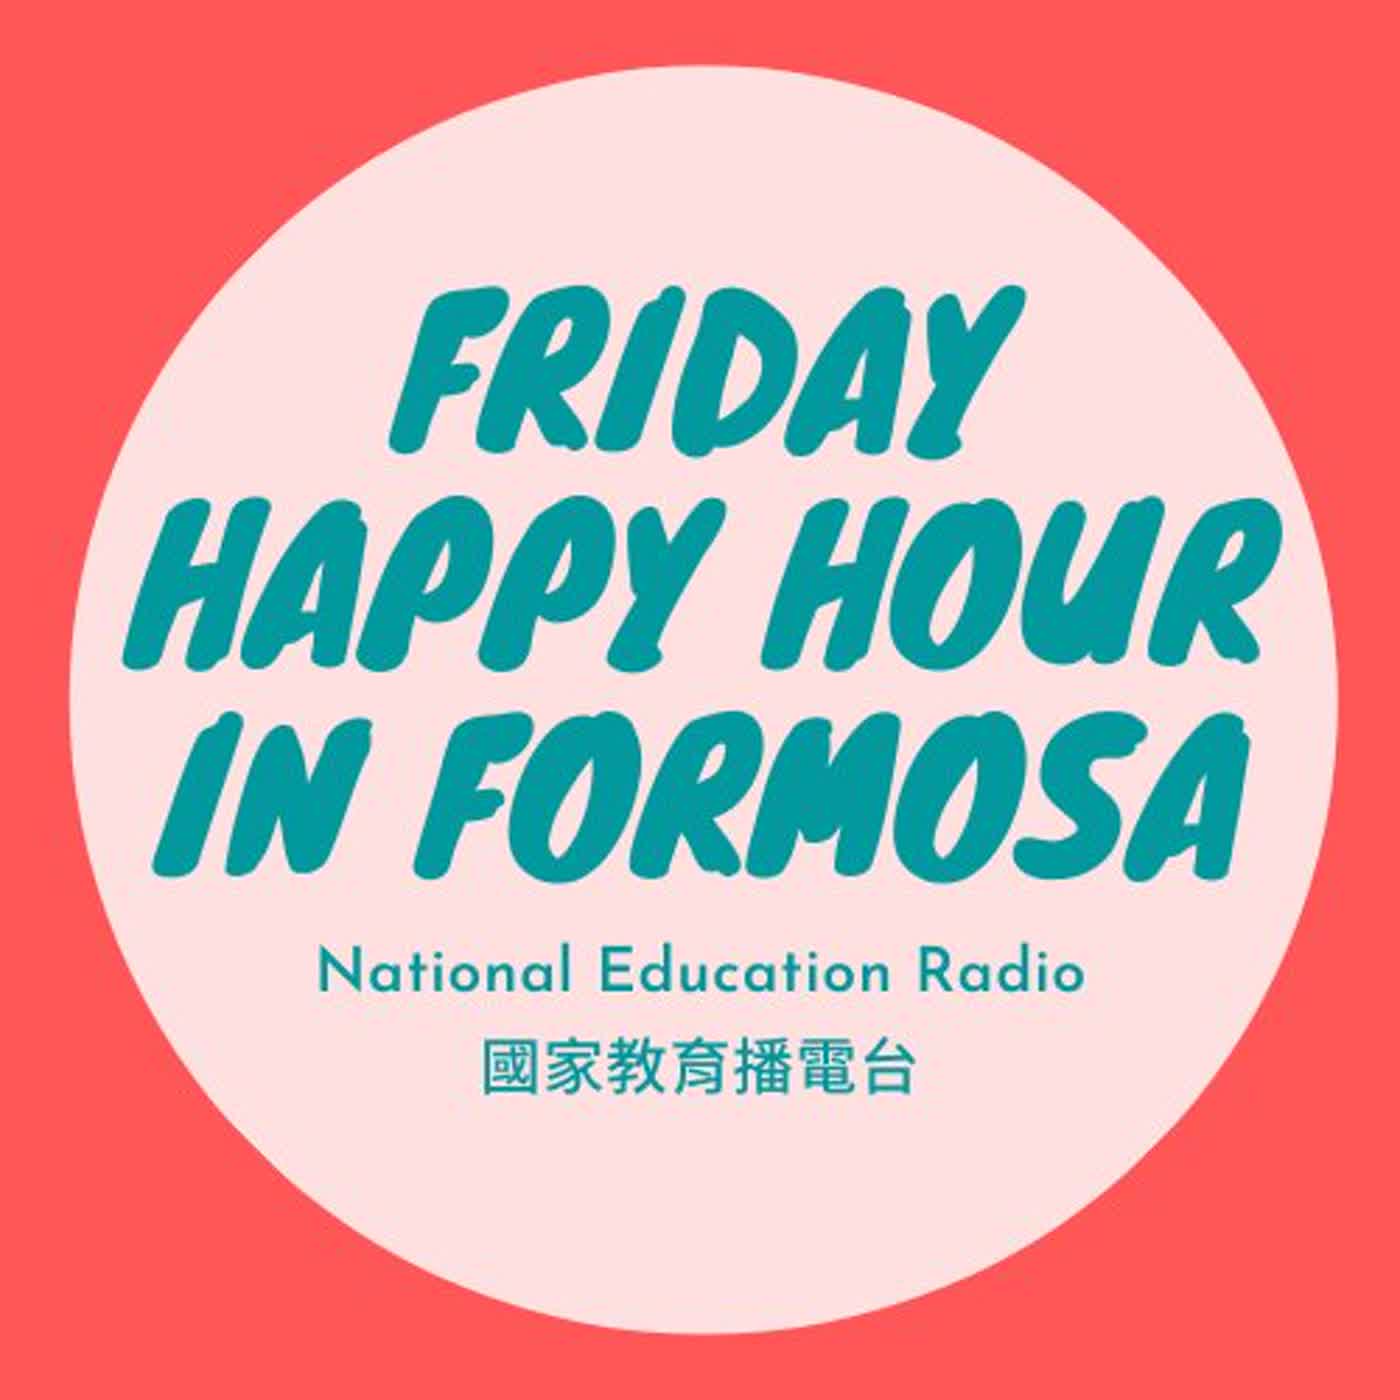 Friday Happy Hour in Formosa 6｜Release the Hounds  * Hanging with Cecilia of Release the Hounds天天跟跟狗狗們一起爬山的人生完美組合!!